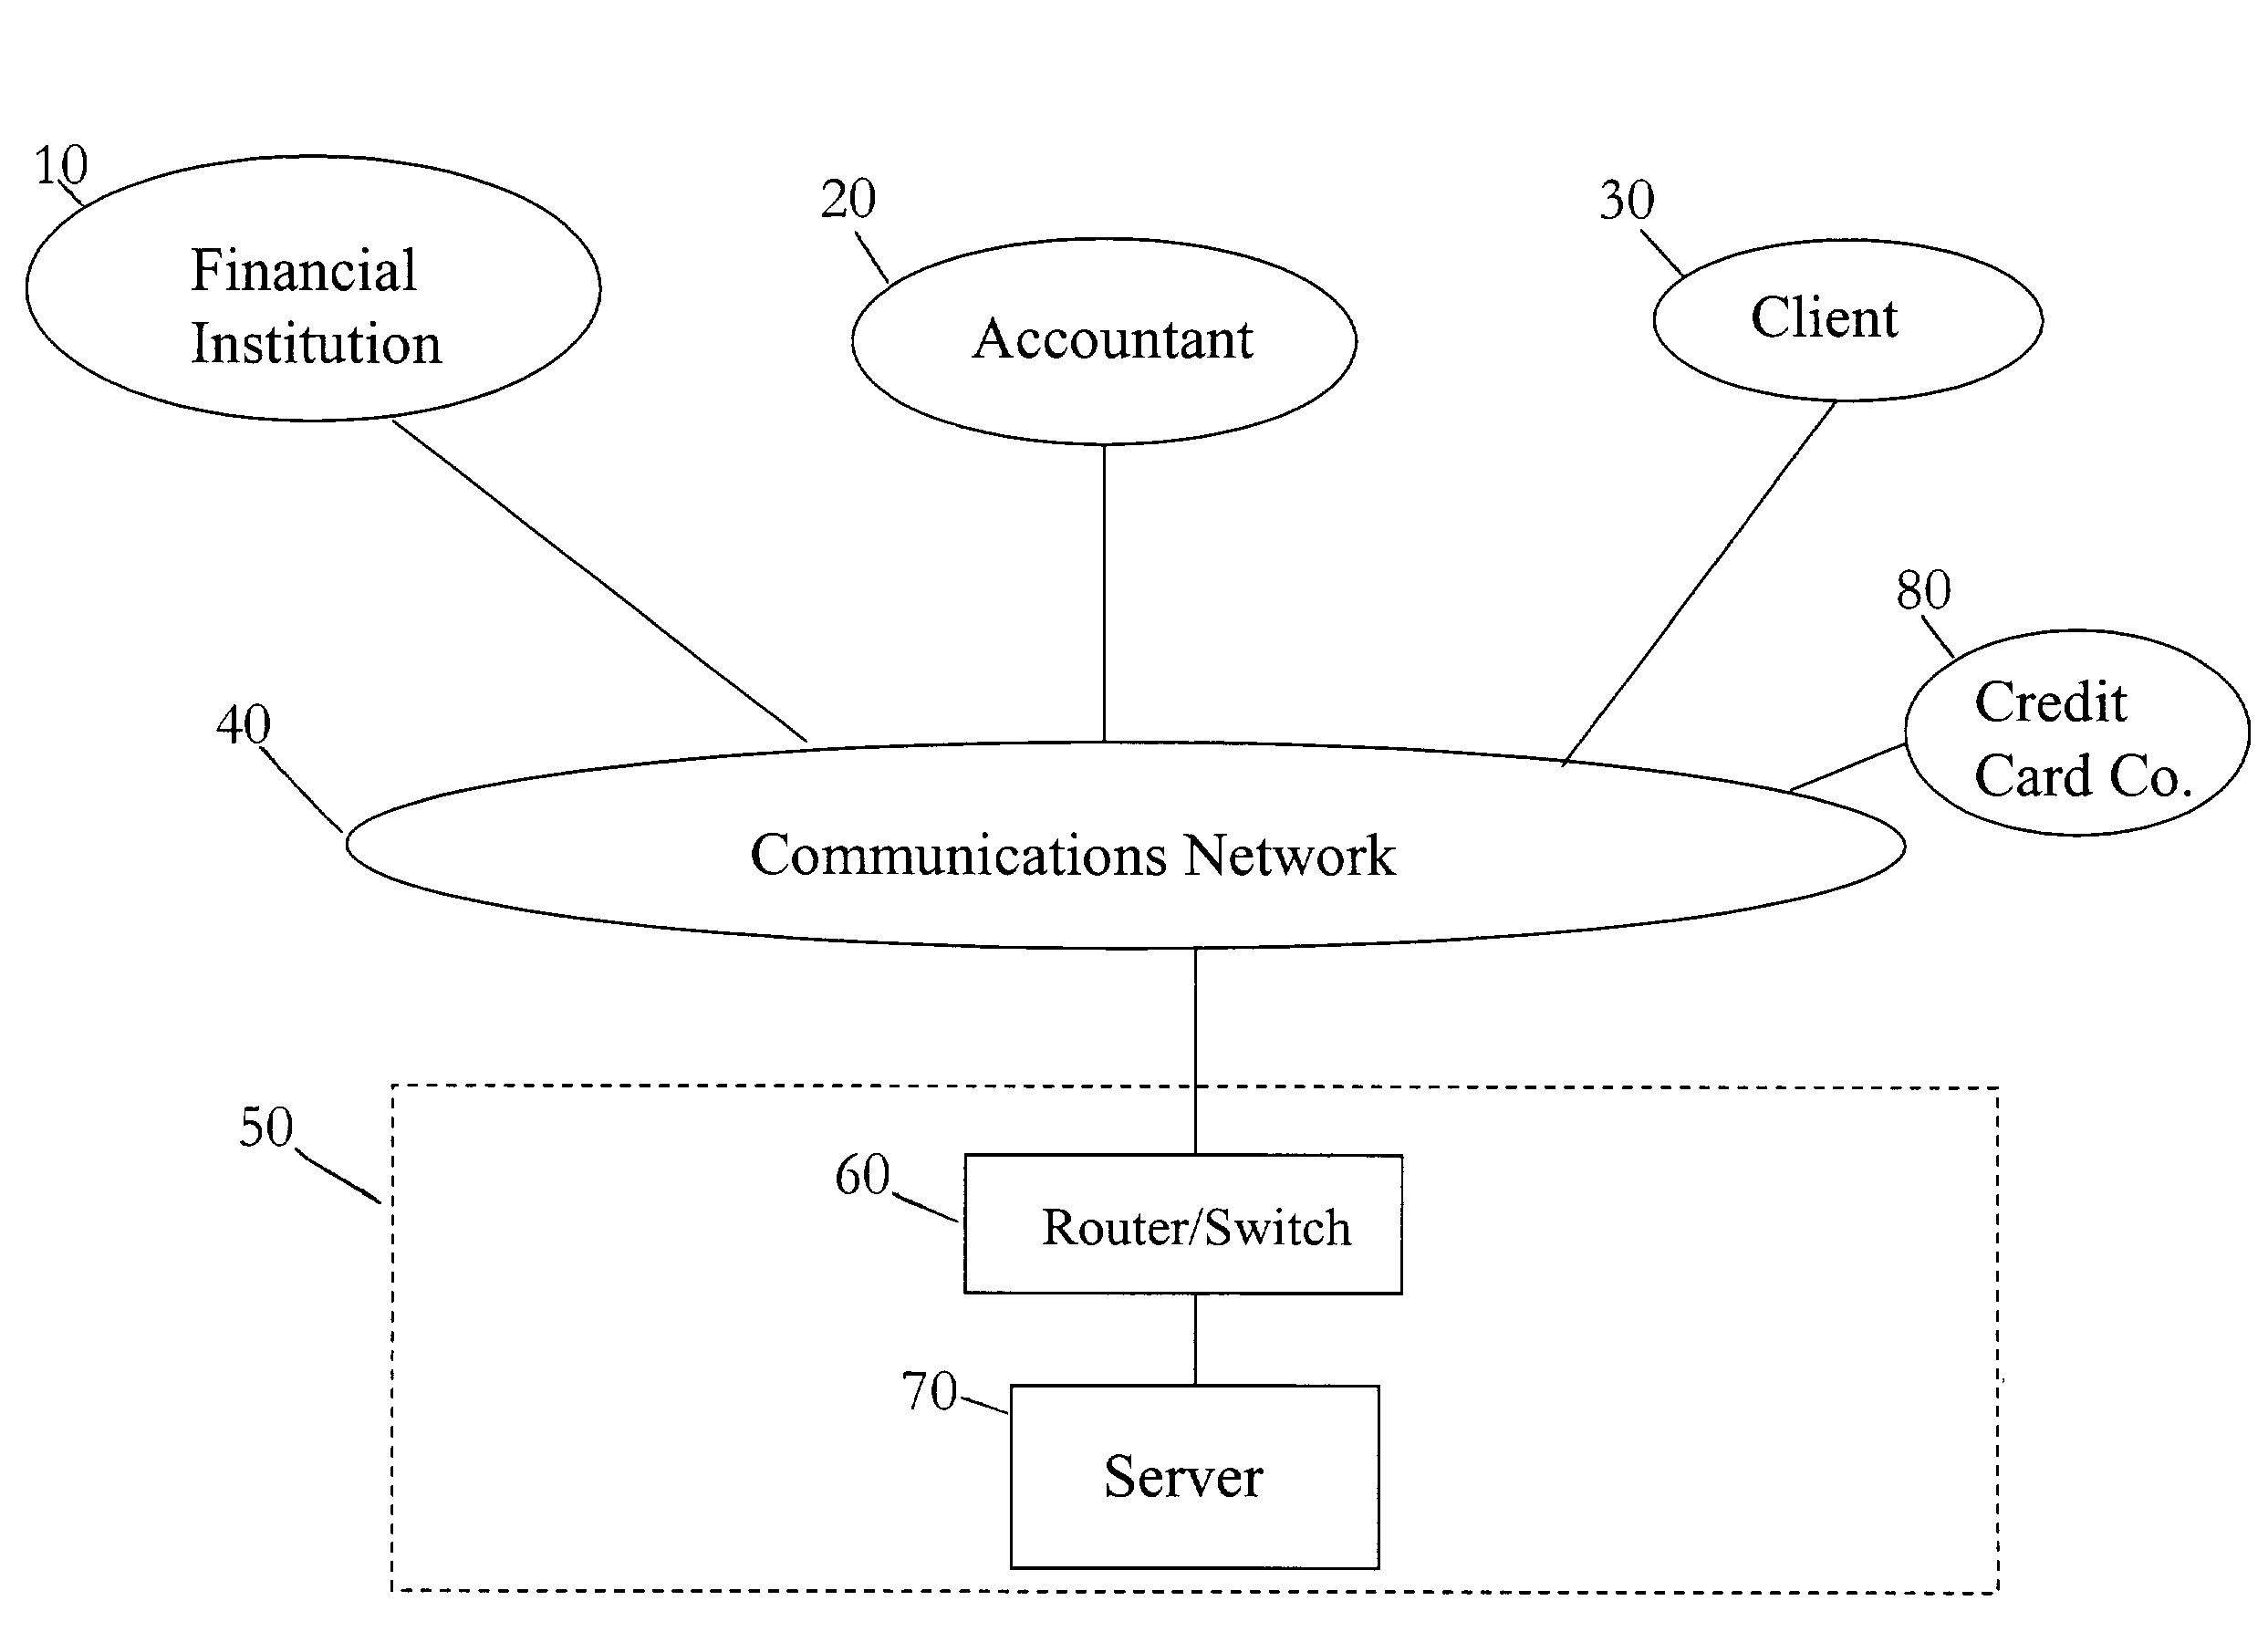 Systems, methods and computer program products facilitating automated confirmations and third-party verifications